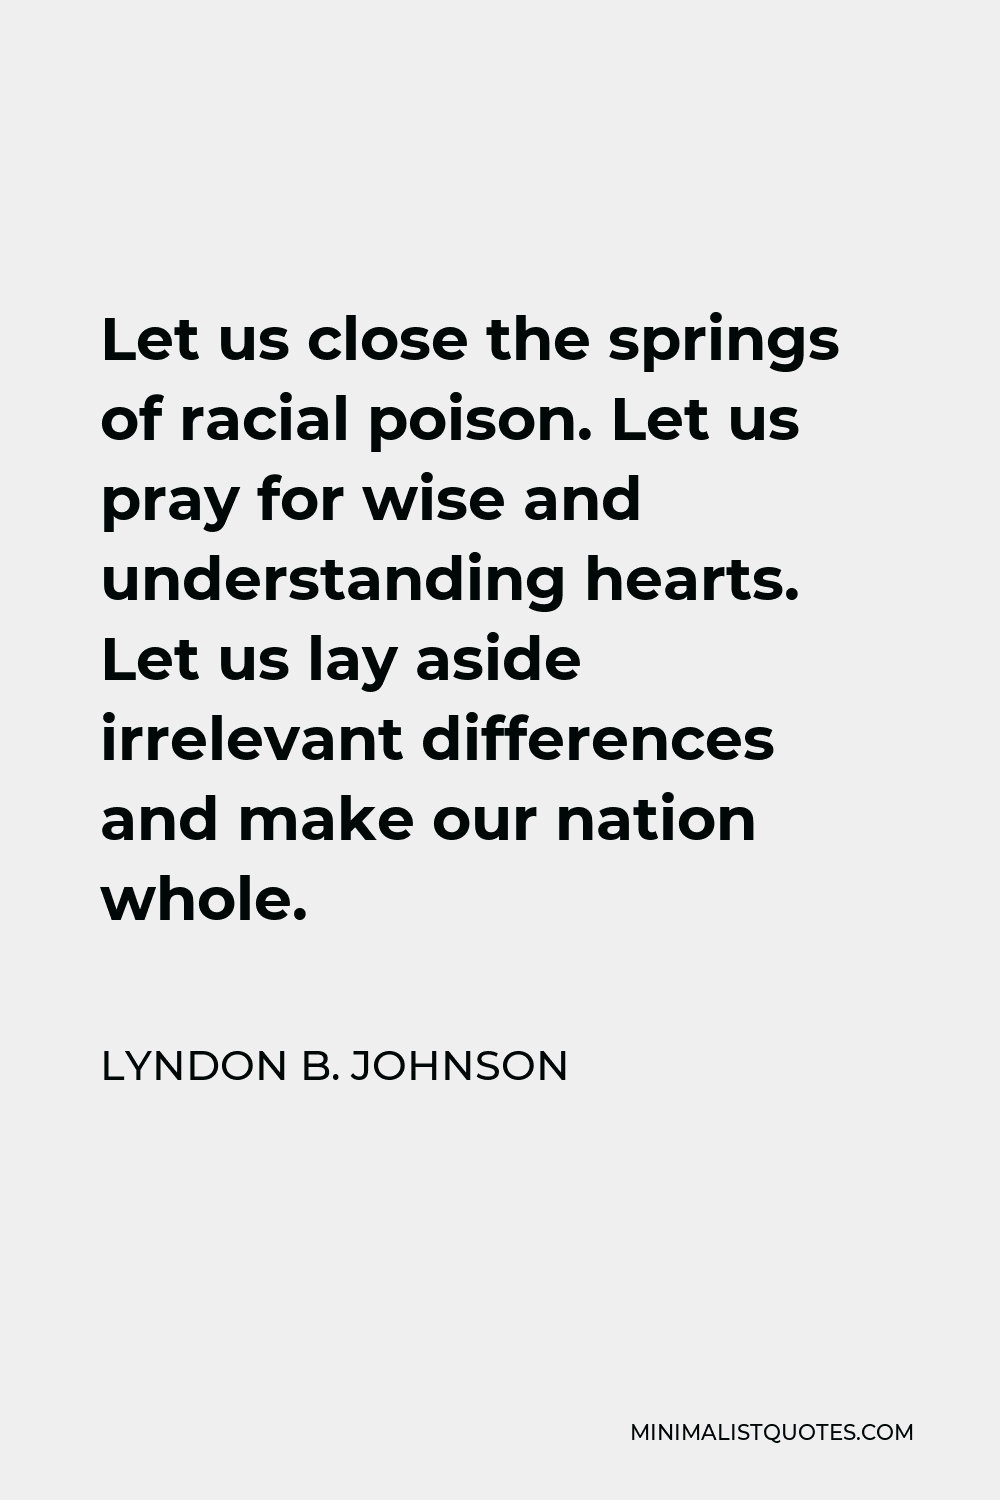 Lyndon B. Johnson Quote - Let us close the springs of racial poison. Let us pray for wise and understanding hearts. Let us lay aside irrelevant differences and make our nation whole.